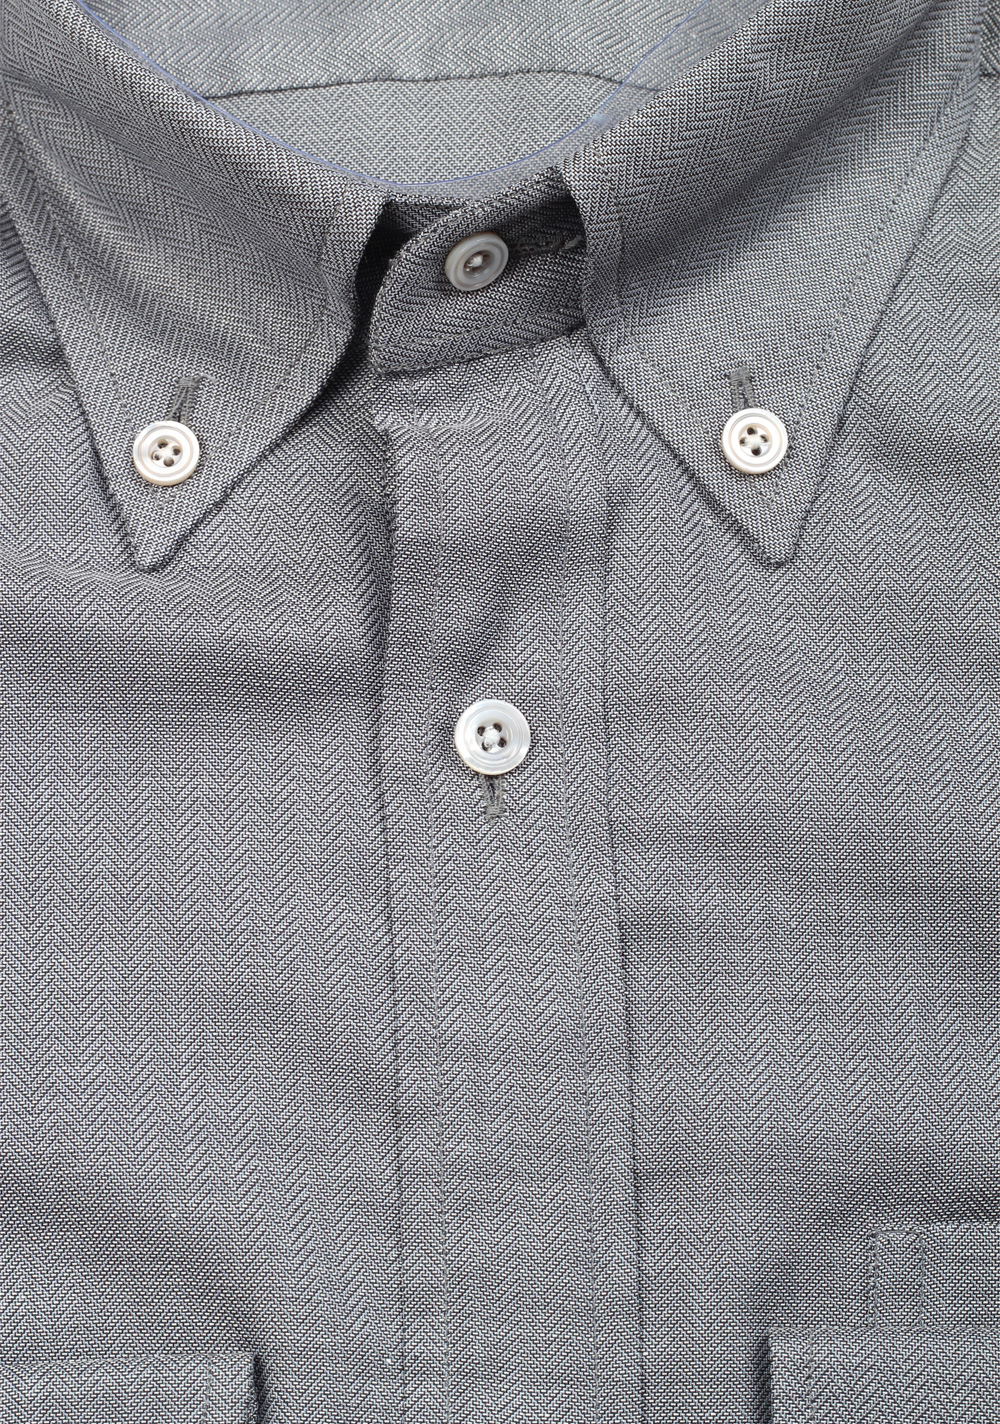 TOM FORD Solid Gray Shirt Size 40 / 15,75 U.S. | Costume Limité